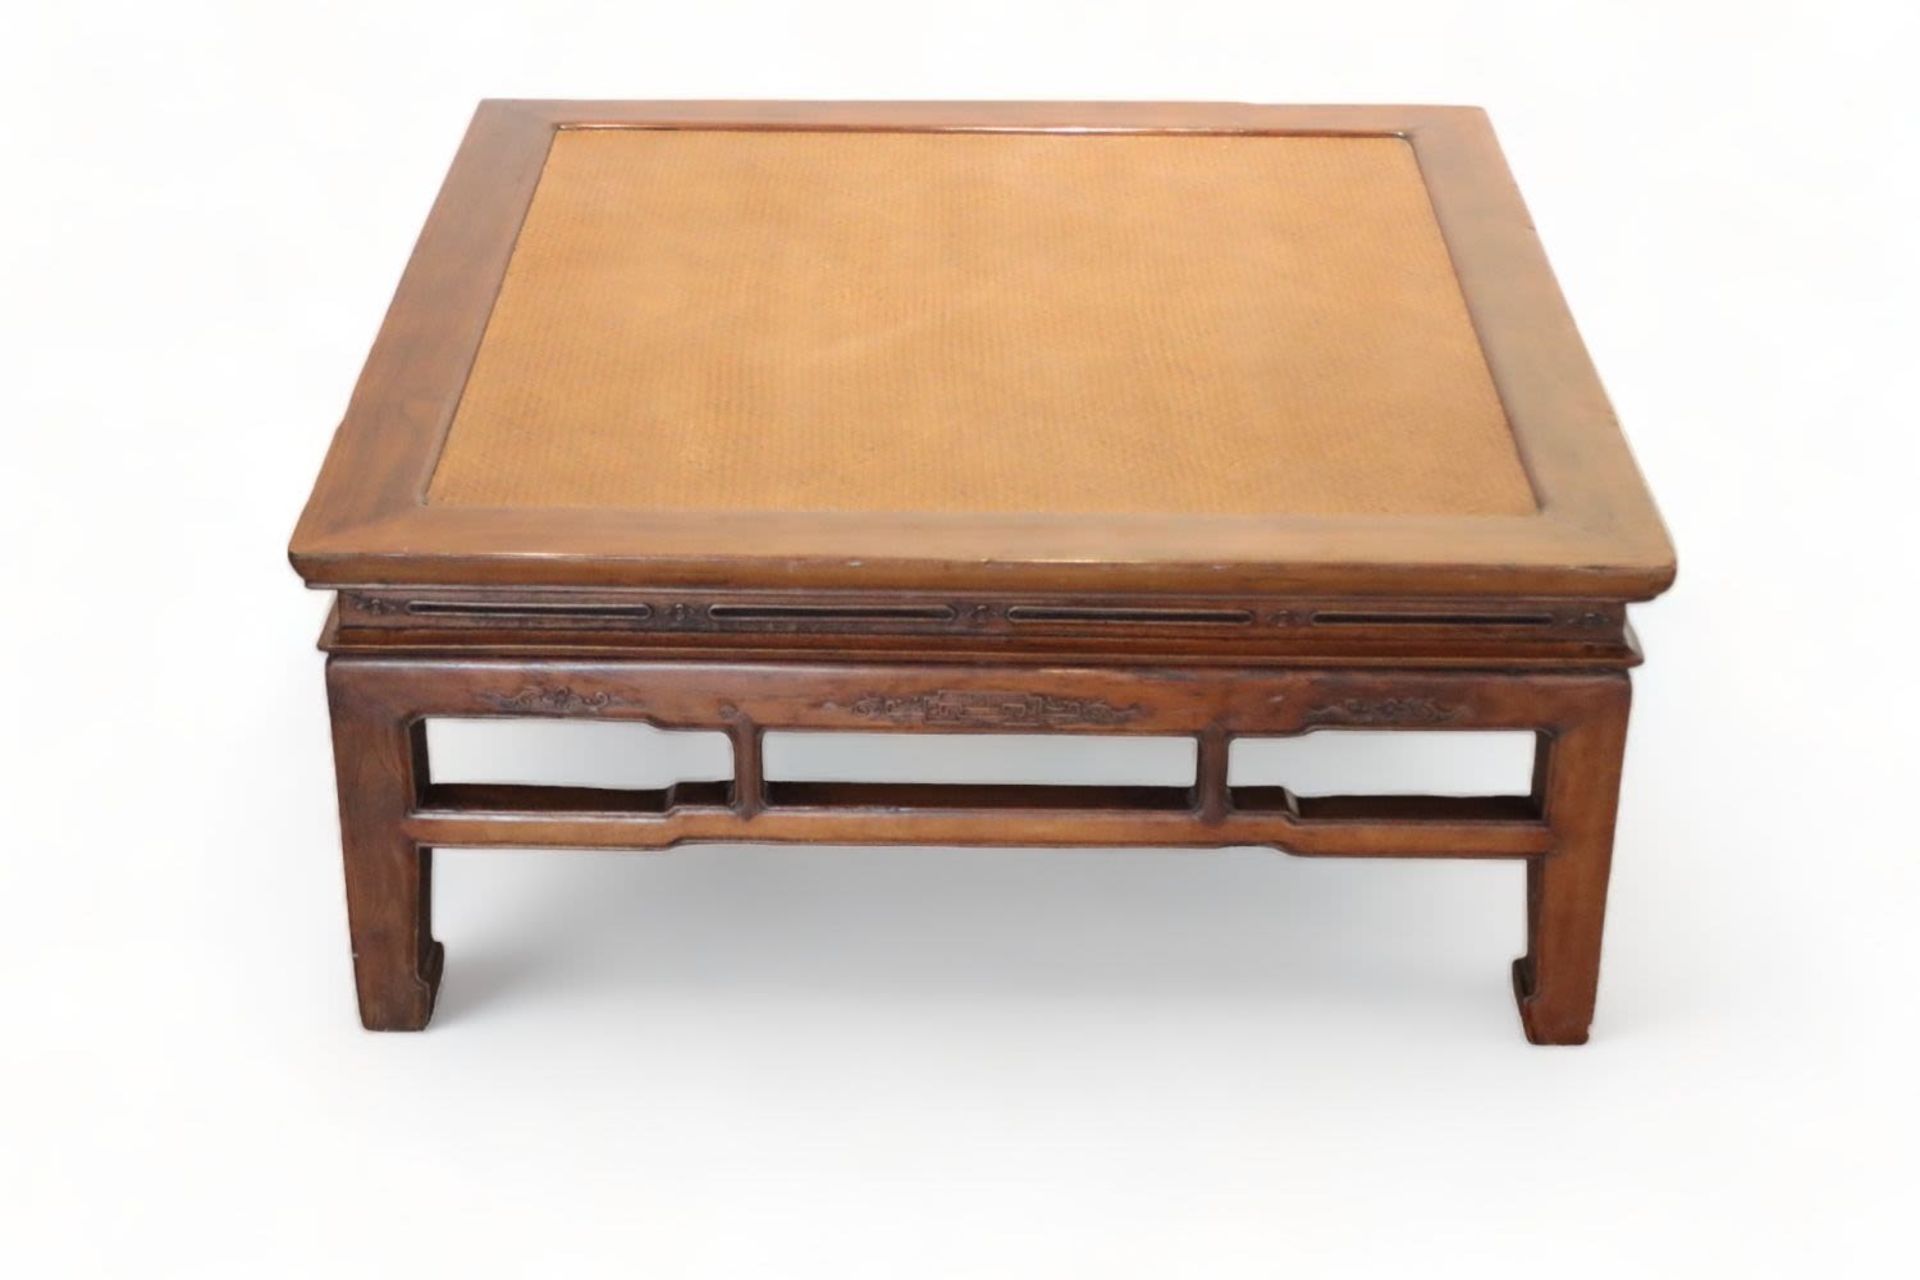 A square Chinese carved wooden table 19th/20th Century - Image 2 of 4